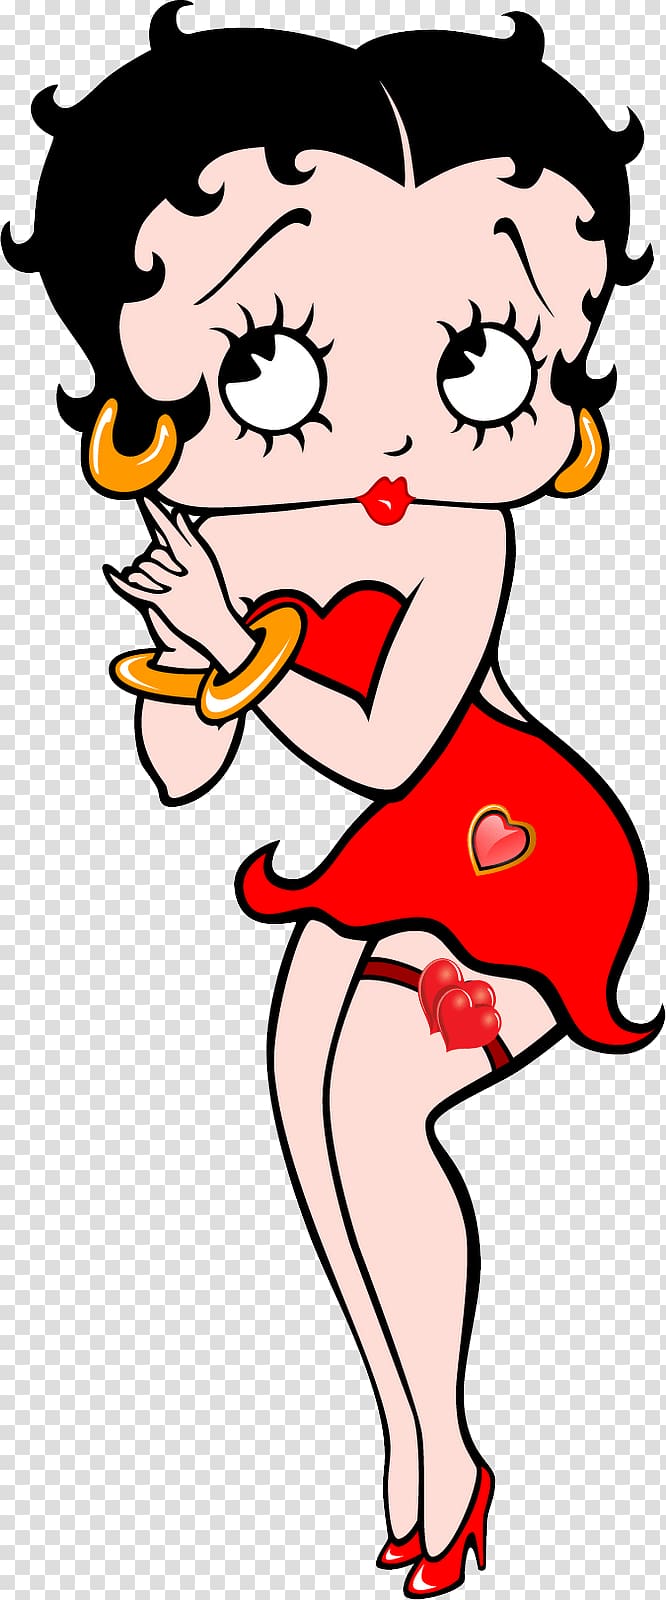 Betty Boop illustration, Betty Boop Side transparent background PNG clipart